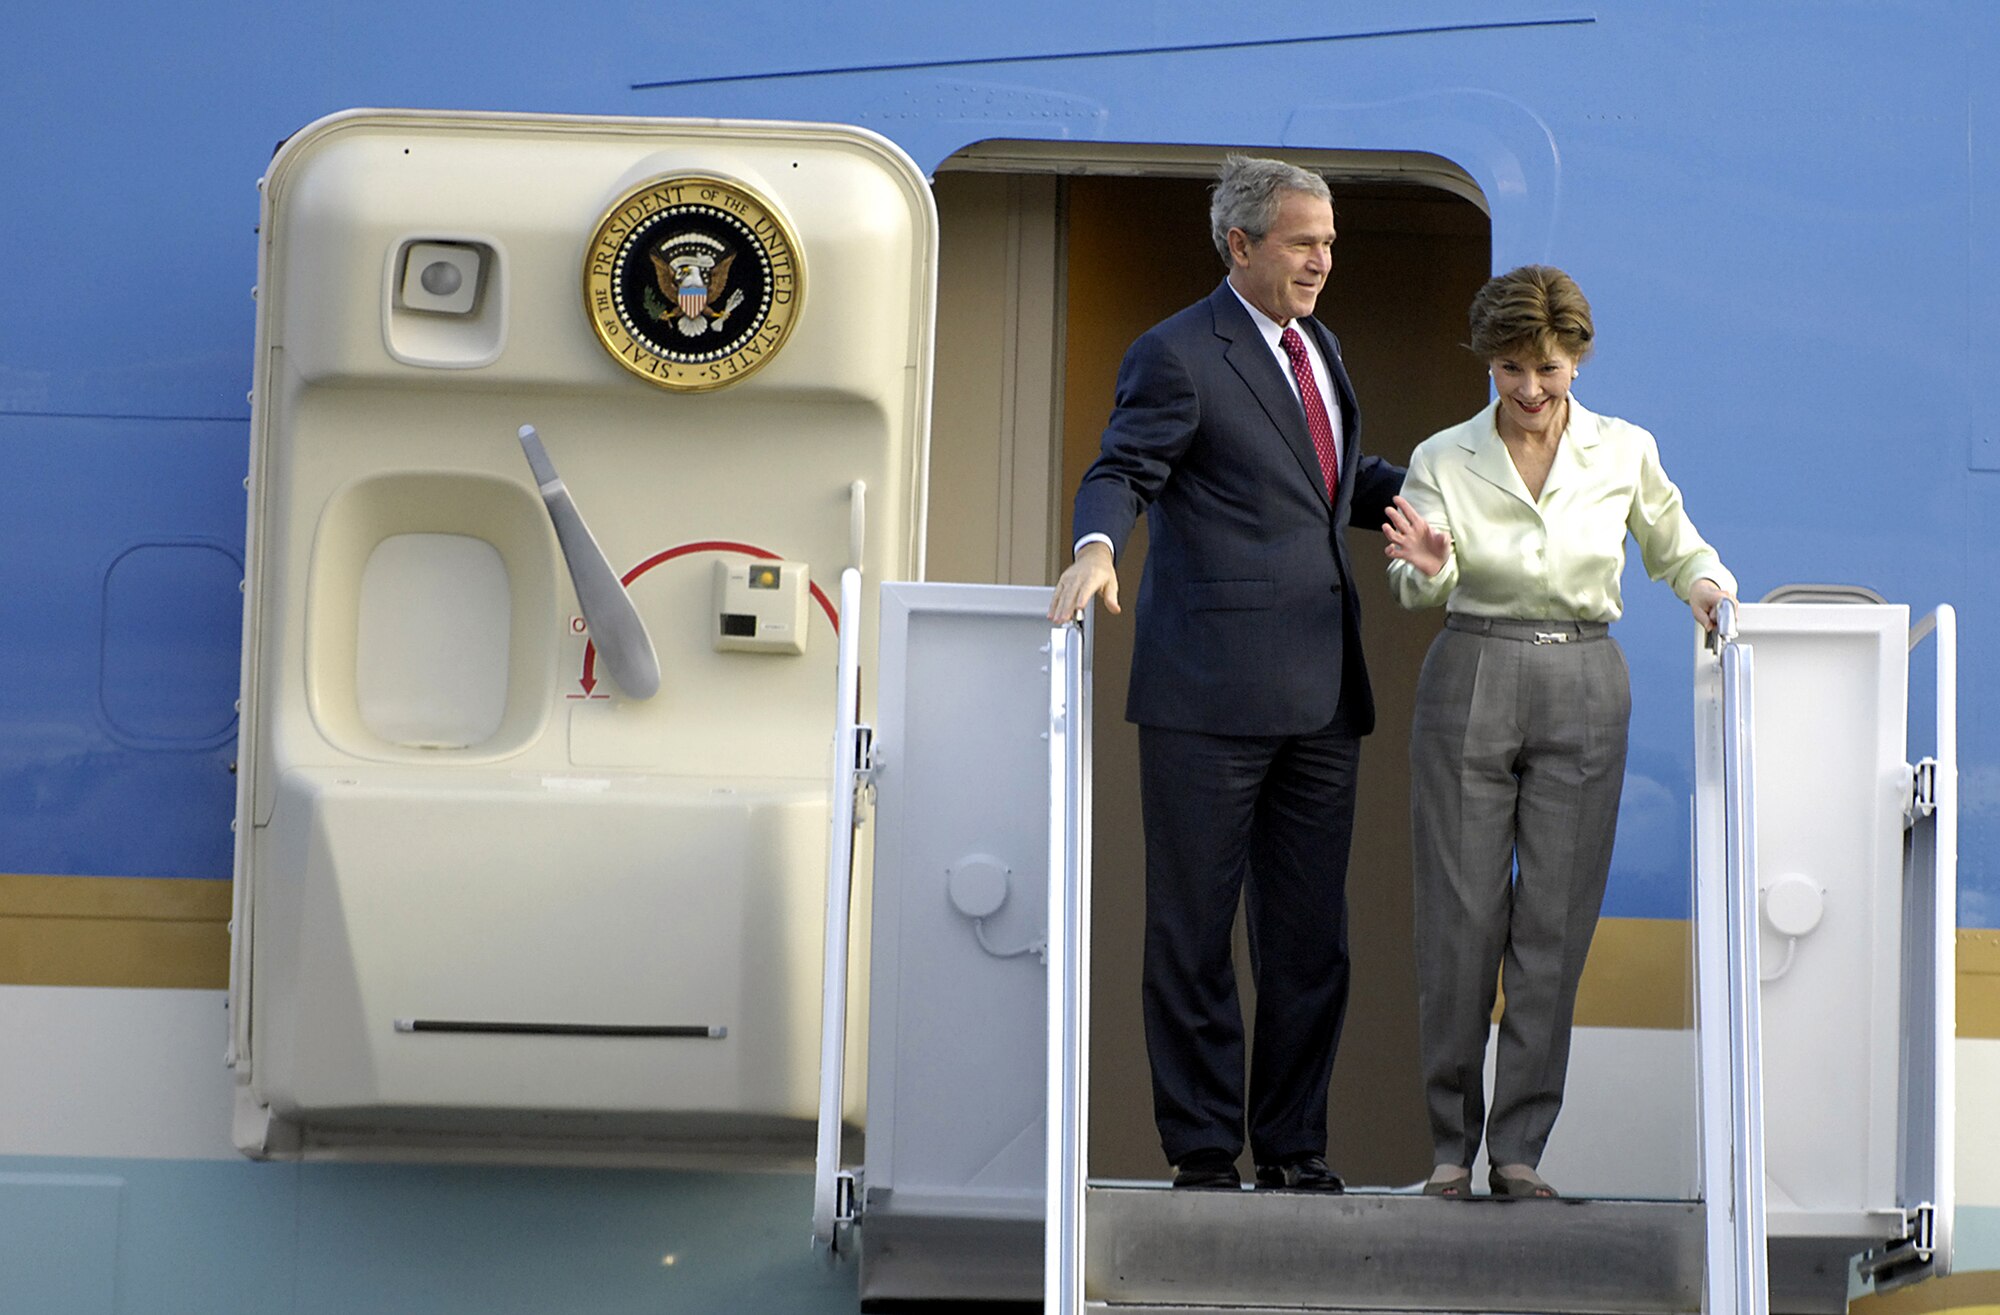 HICKAM AFB, Hawaii -- President George Bush and First Lady Laura Bush step off Air Force One, November 20, on the Hickam Air Force Base flightline in Hawaii.  The President is on his last leg of an eight day Pacific economic tour making stops at Vietnam, Indonesia, Russia and Singapore.  While in Hawaii he is having breakfast with Hawaii-based servicemembers and meeting with Pacific Command leaders. (Official Air Force photo by  Marine Sgt. Jeremy M. Vought)